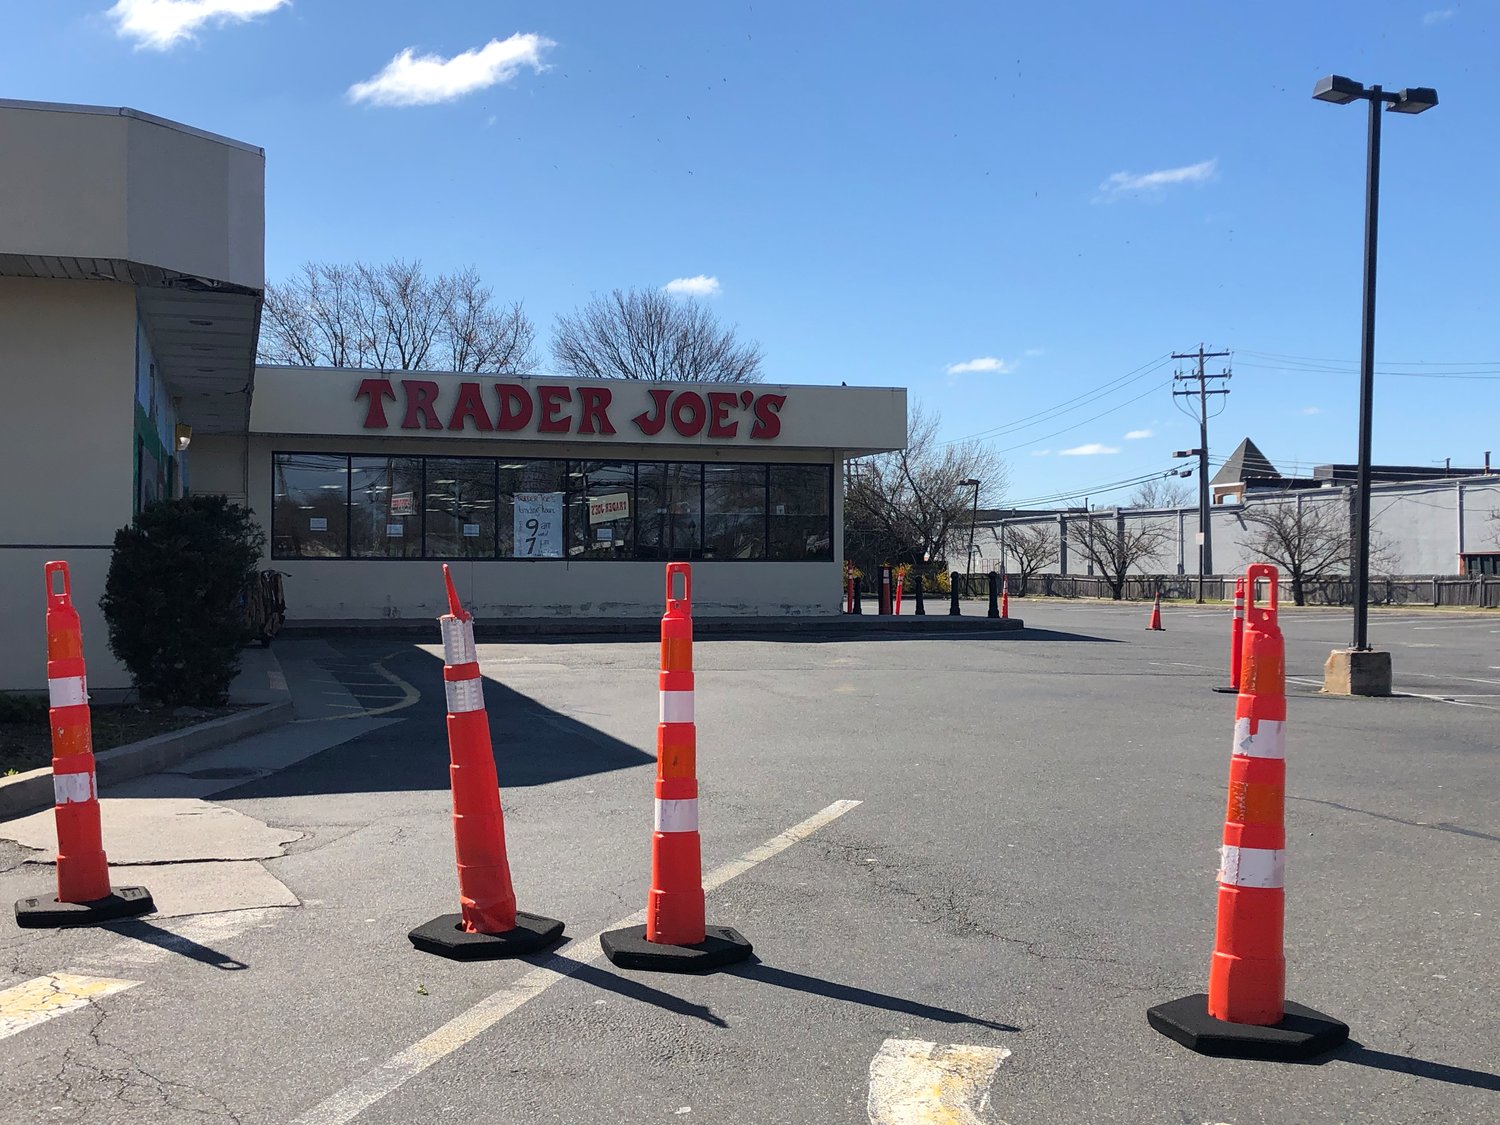 The Trader Joe's store in Merrick is temporarily closed to customers after an undisclosed number of employees tested positive for coronavirus, according to a company statement. 